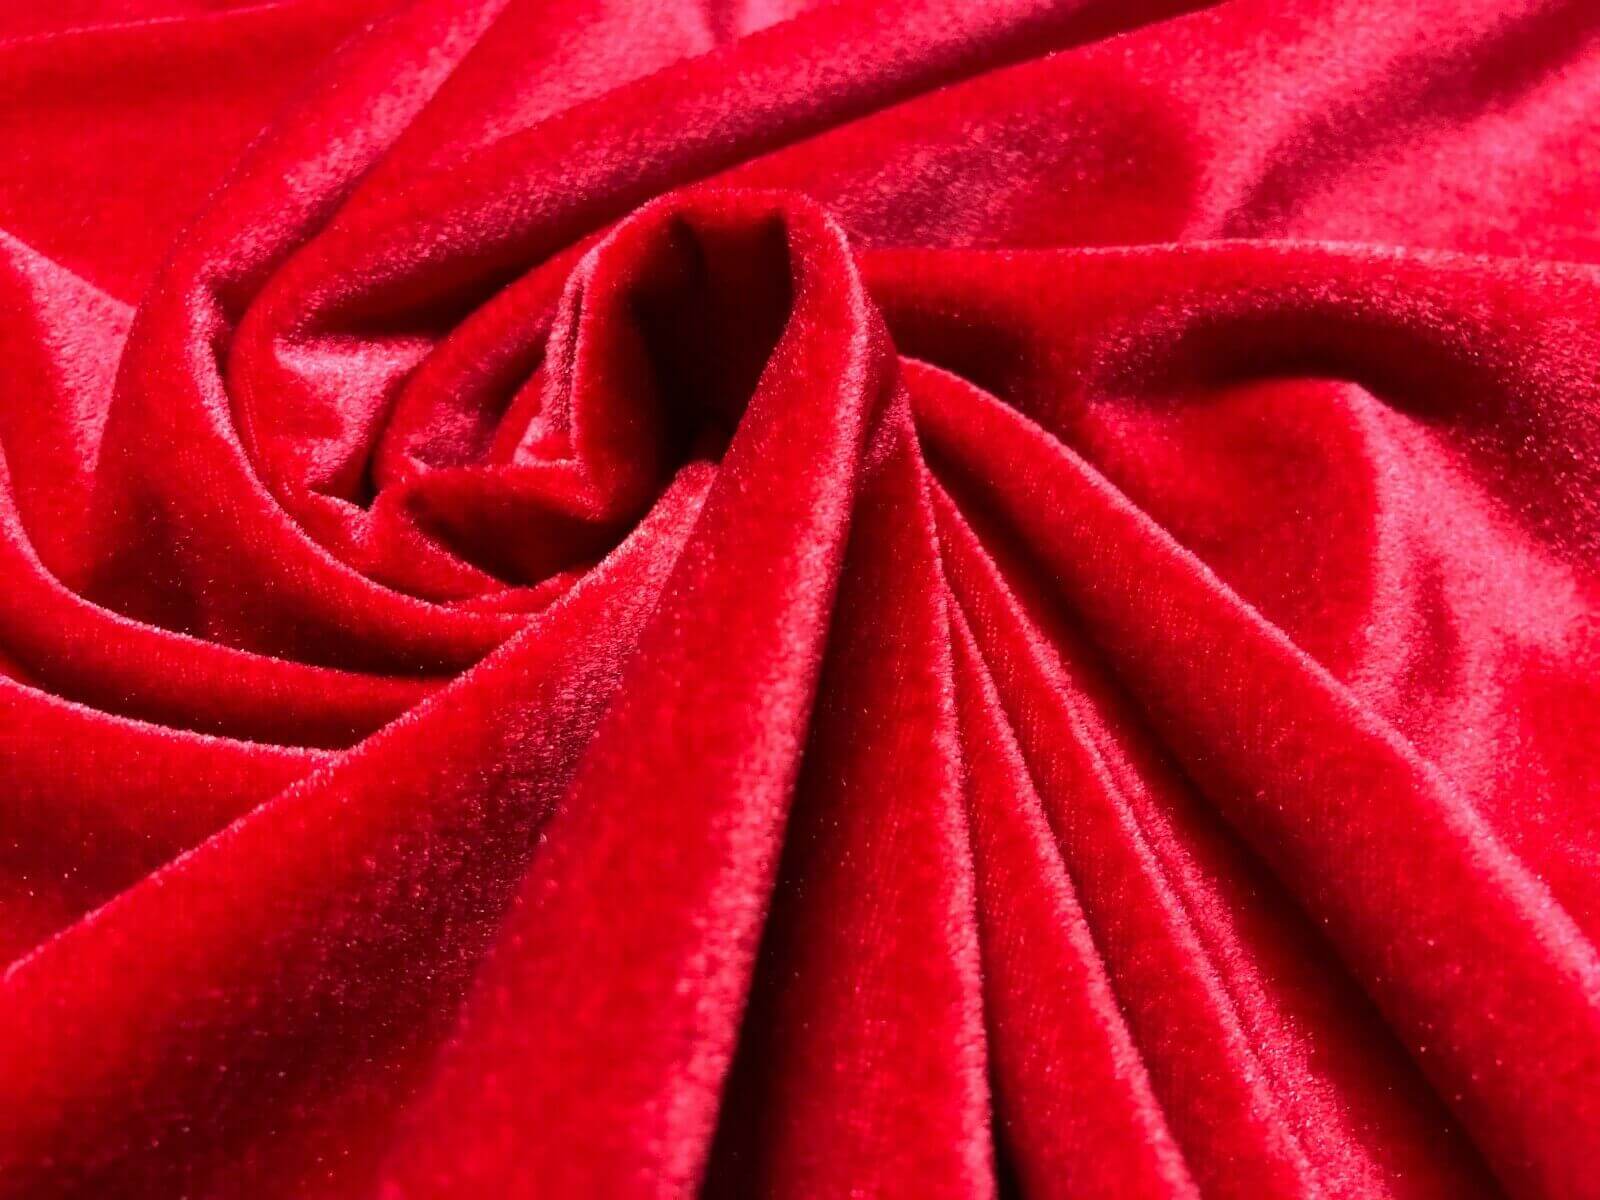 Hot Red Decor Velvet Fabric Soft Strong Velour Stretch Material Home Decor,  Curtains, Upholstery, Dress 165cm Wide -  Canada